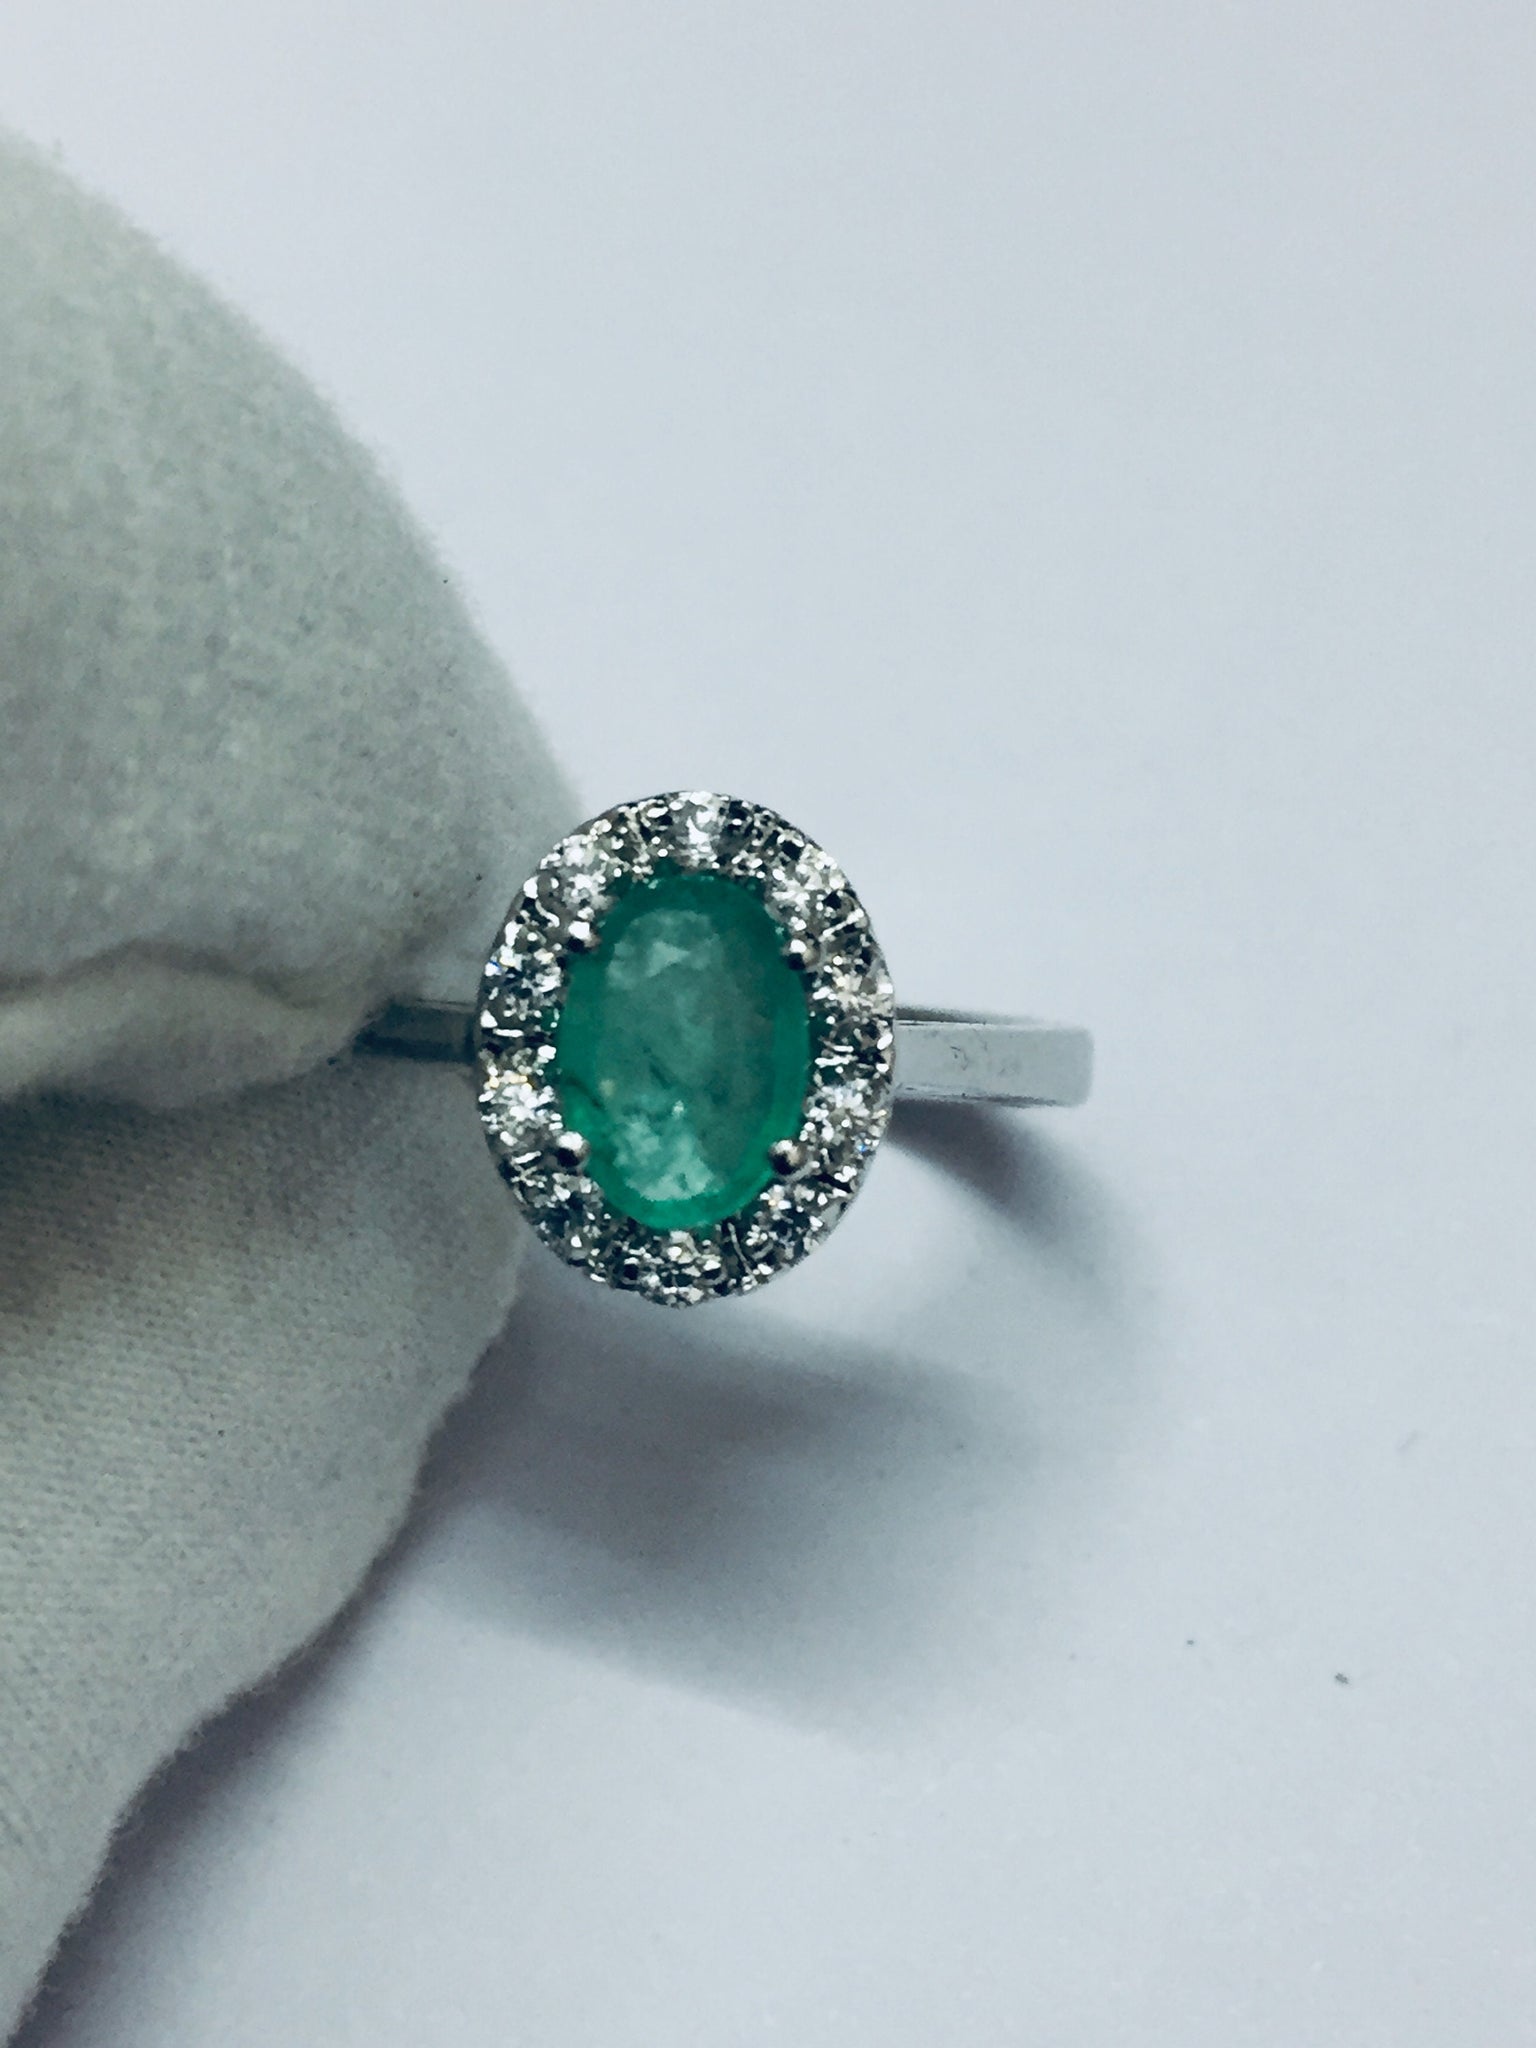 Sterling Silver Emerald Ring 5x7 mm Oval Emerald Natural Emerald Ring Silver Emerald Ring Man Emerald Ring Emerald Solitaire Ring